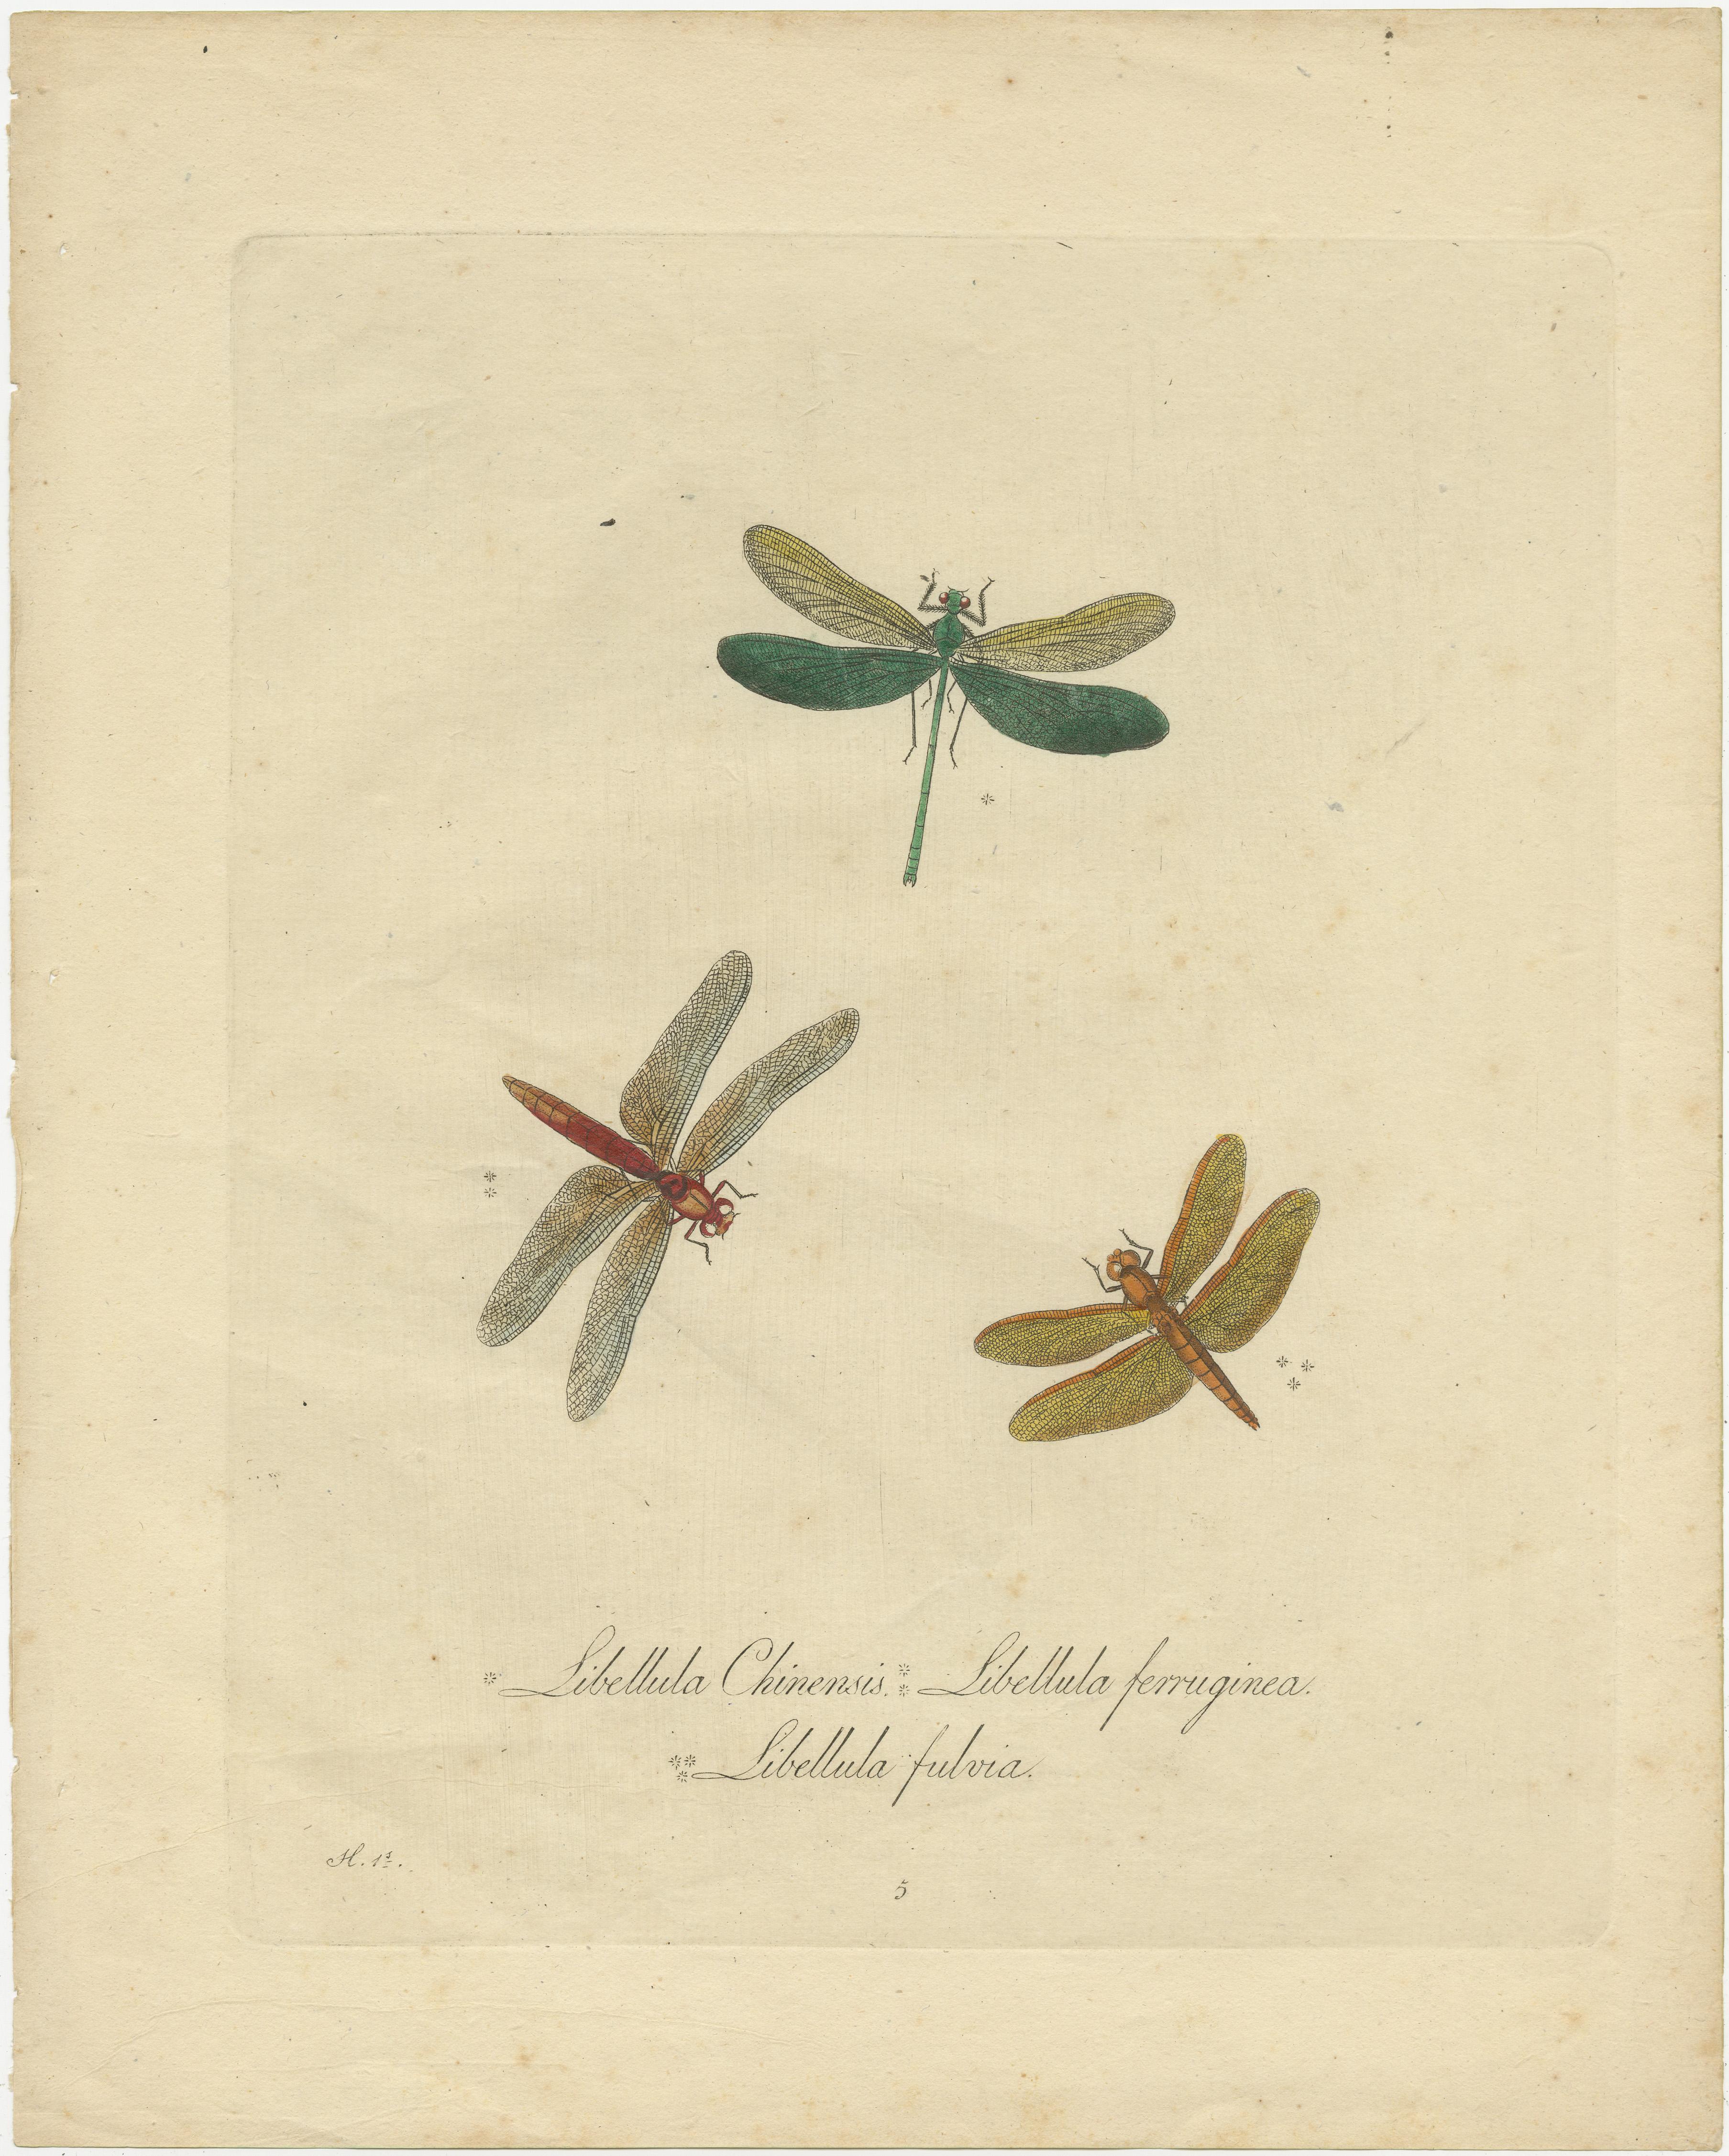 Antique print titled 'Libellula Chinensis - Libellula Ferruginea - Libellula Fulvia'. Original antique print of dragonflies. Source unknown, to be determined. Most likely from an edition of 'An Epitome Of The Natural History Of The Insects Of China